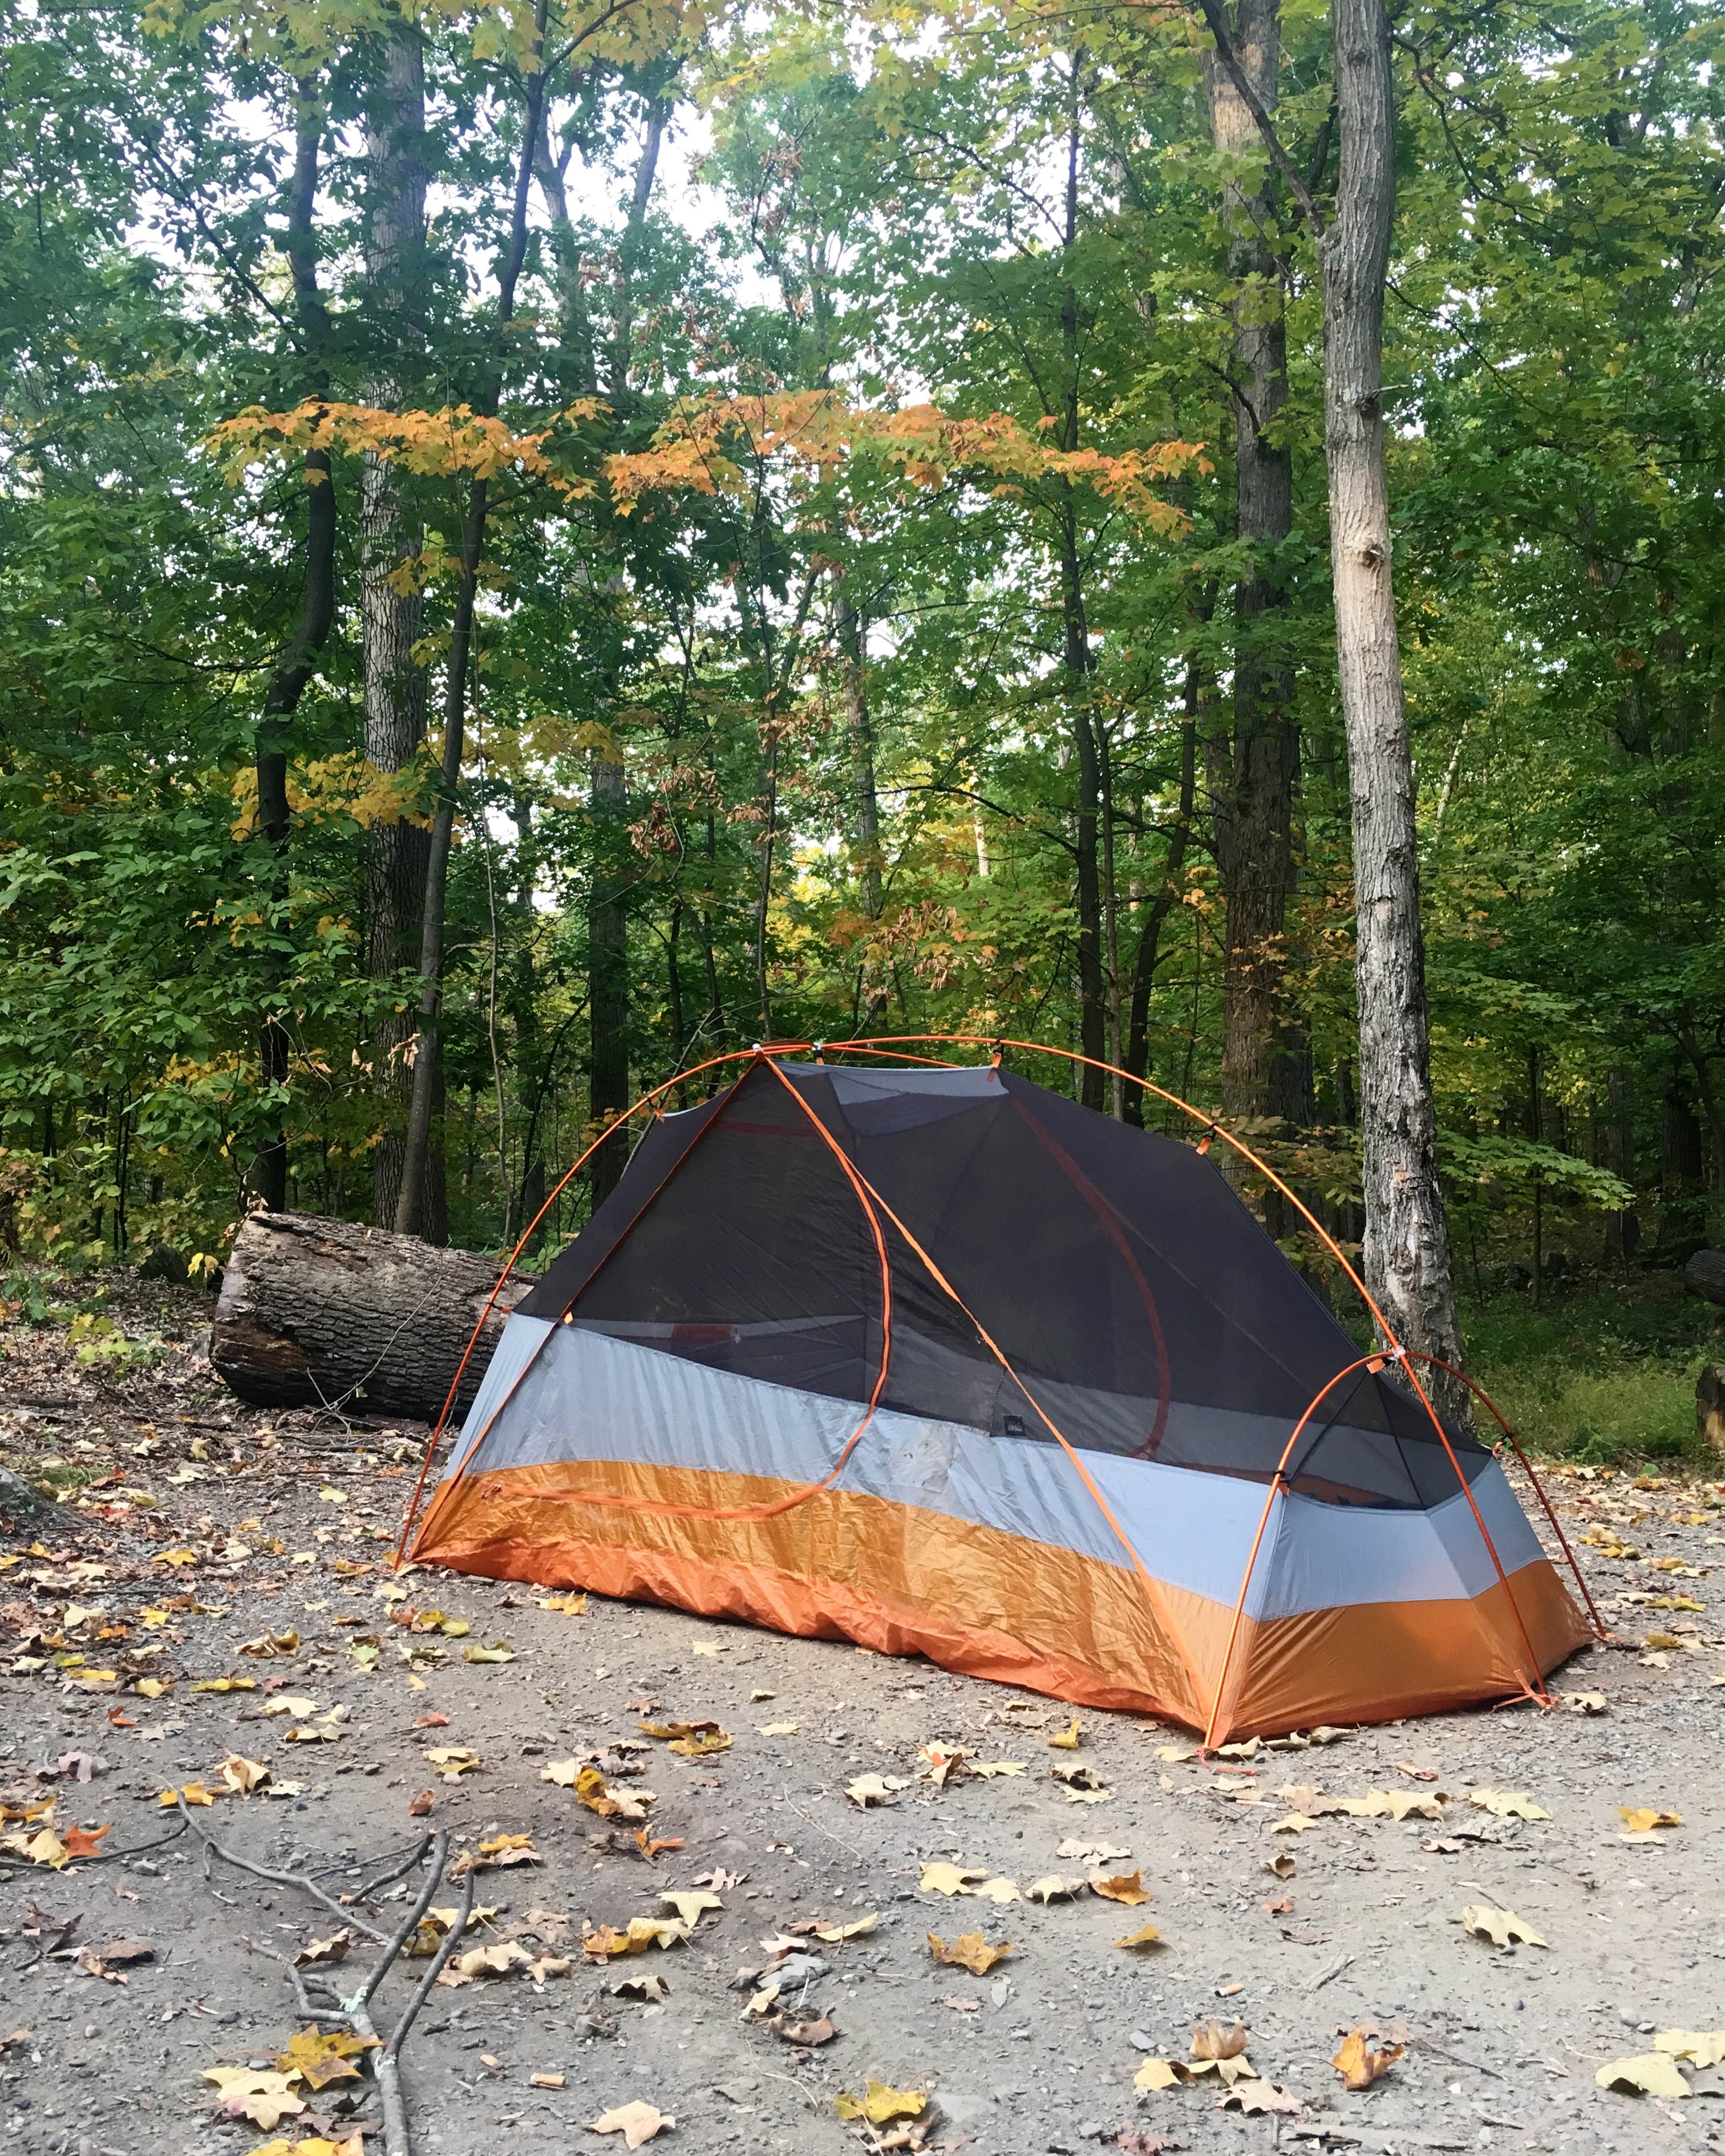 Camper submitted image from Mills Norrie State Park - 5